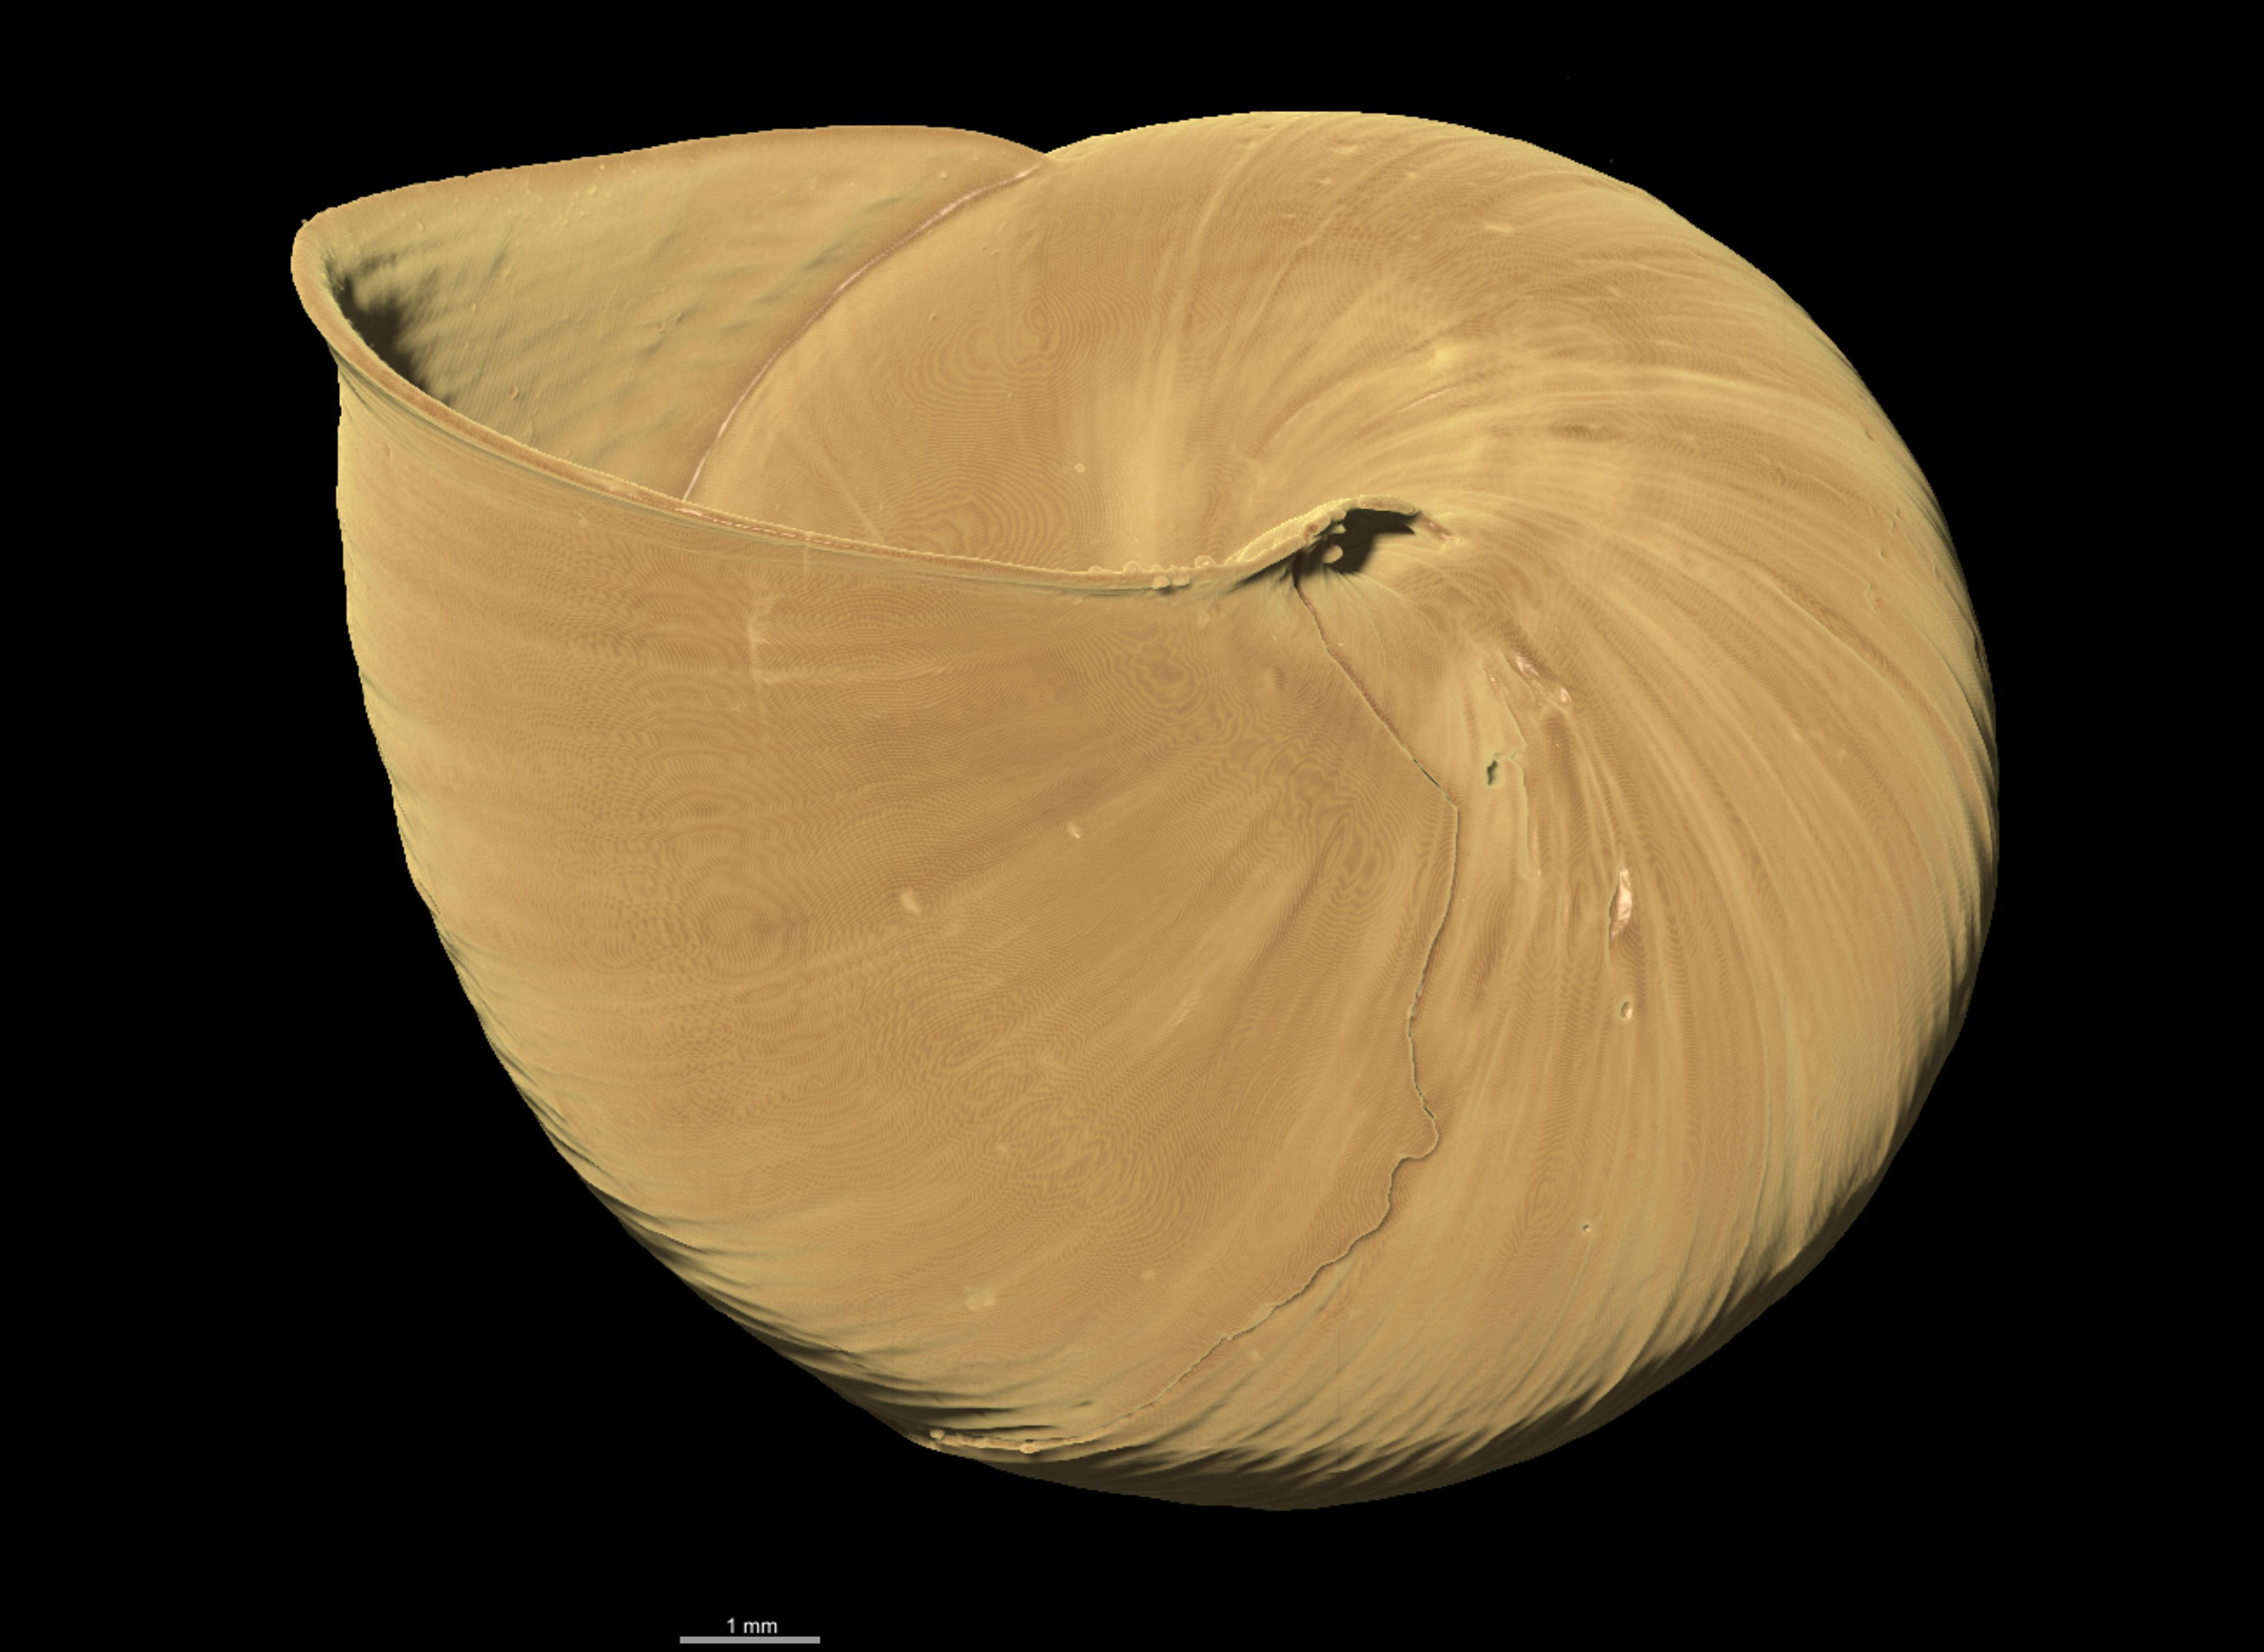 BE-RBINS-INV PARALECTOTYPE MT 2350 Bulimulus ephippium BOTTOM MICROCT XRE.jpg